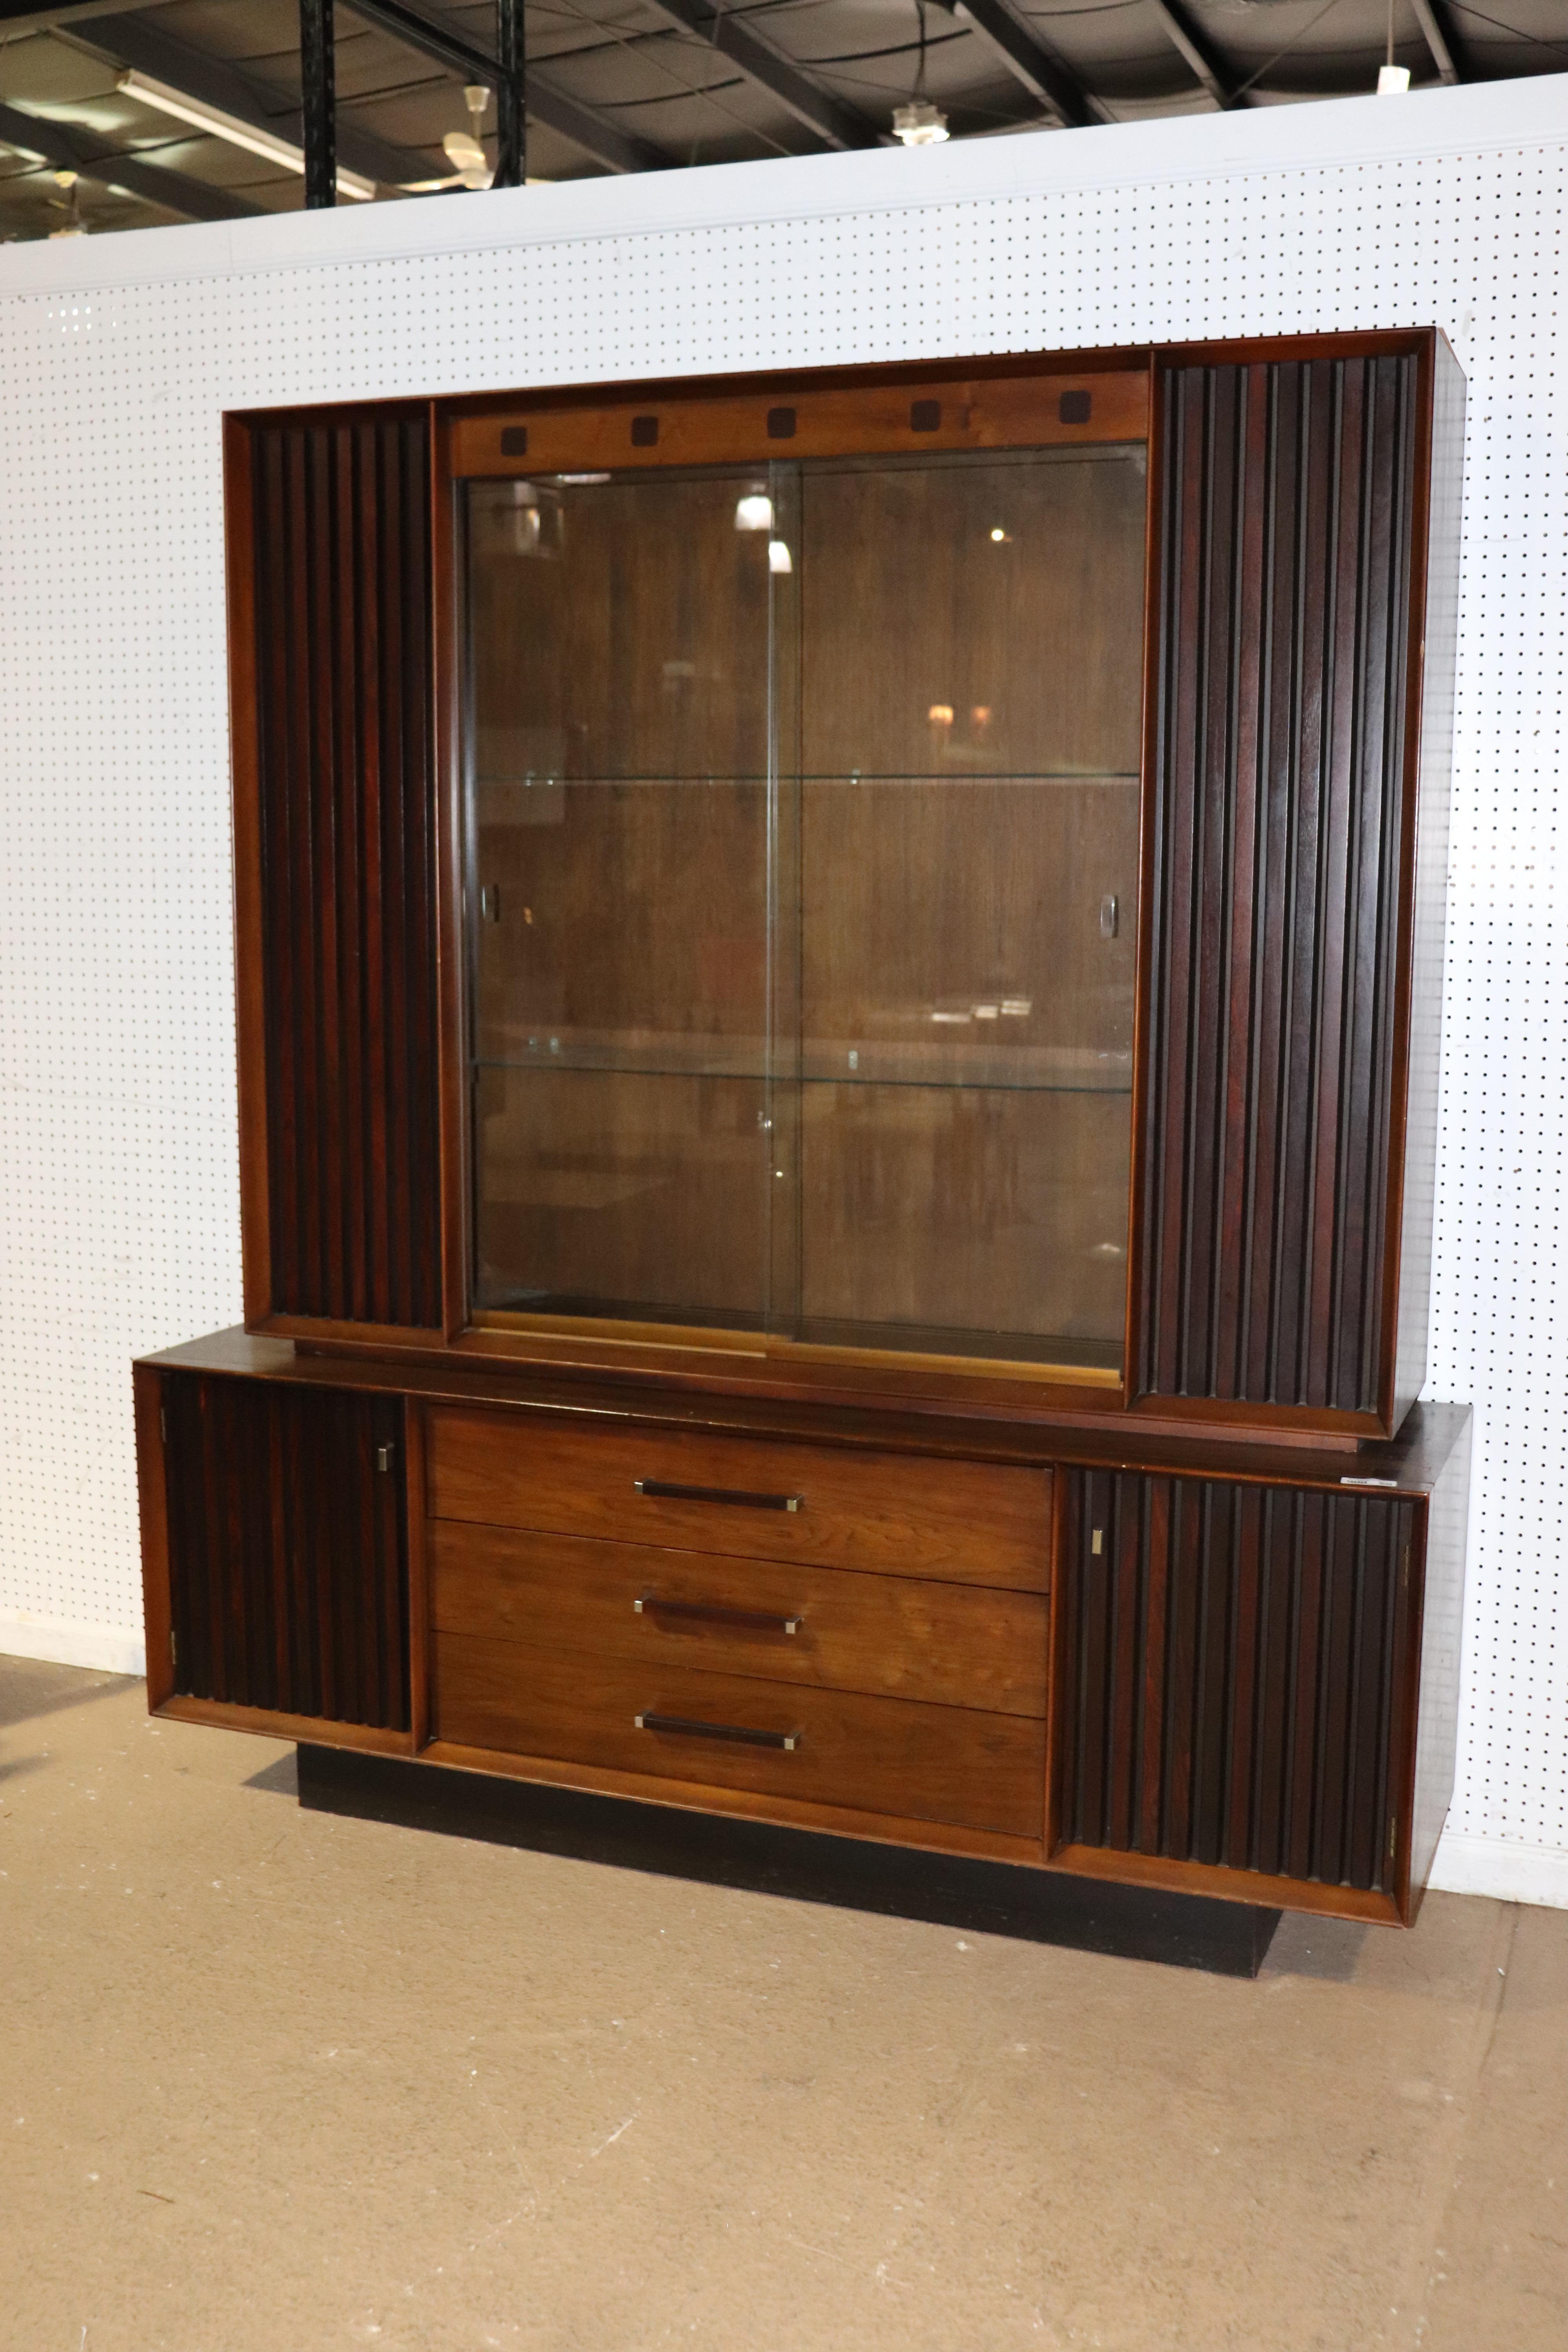 This is a gorgeous rosewood and walnut china cabinet from Lane Furniture. The cabinet is from the 1950s-1960s era. The china cabinet is in good condition and measures: 83 tall x 74 wide x 18.5 deep.